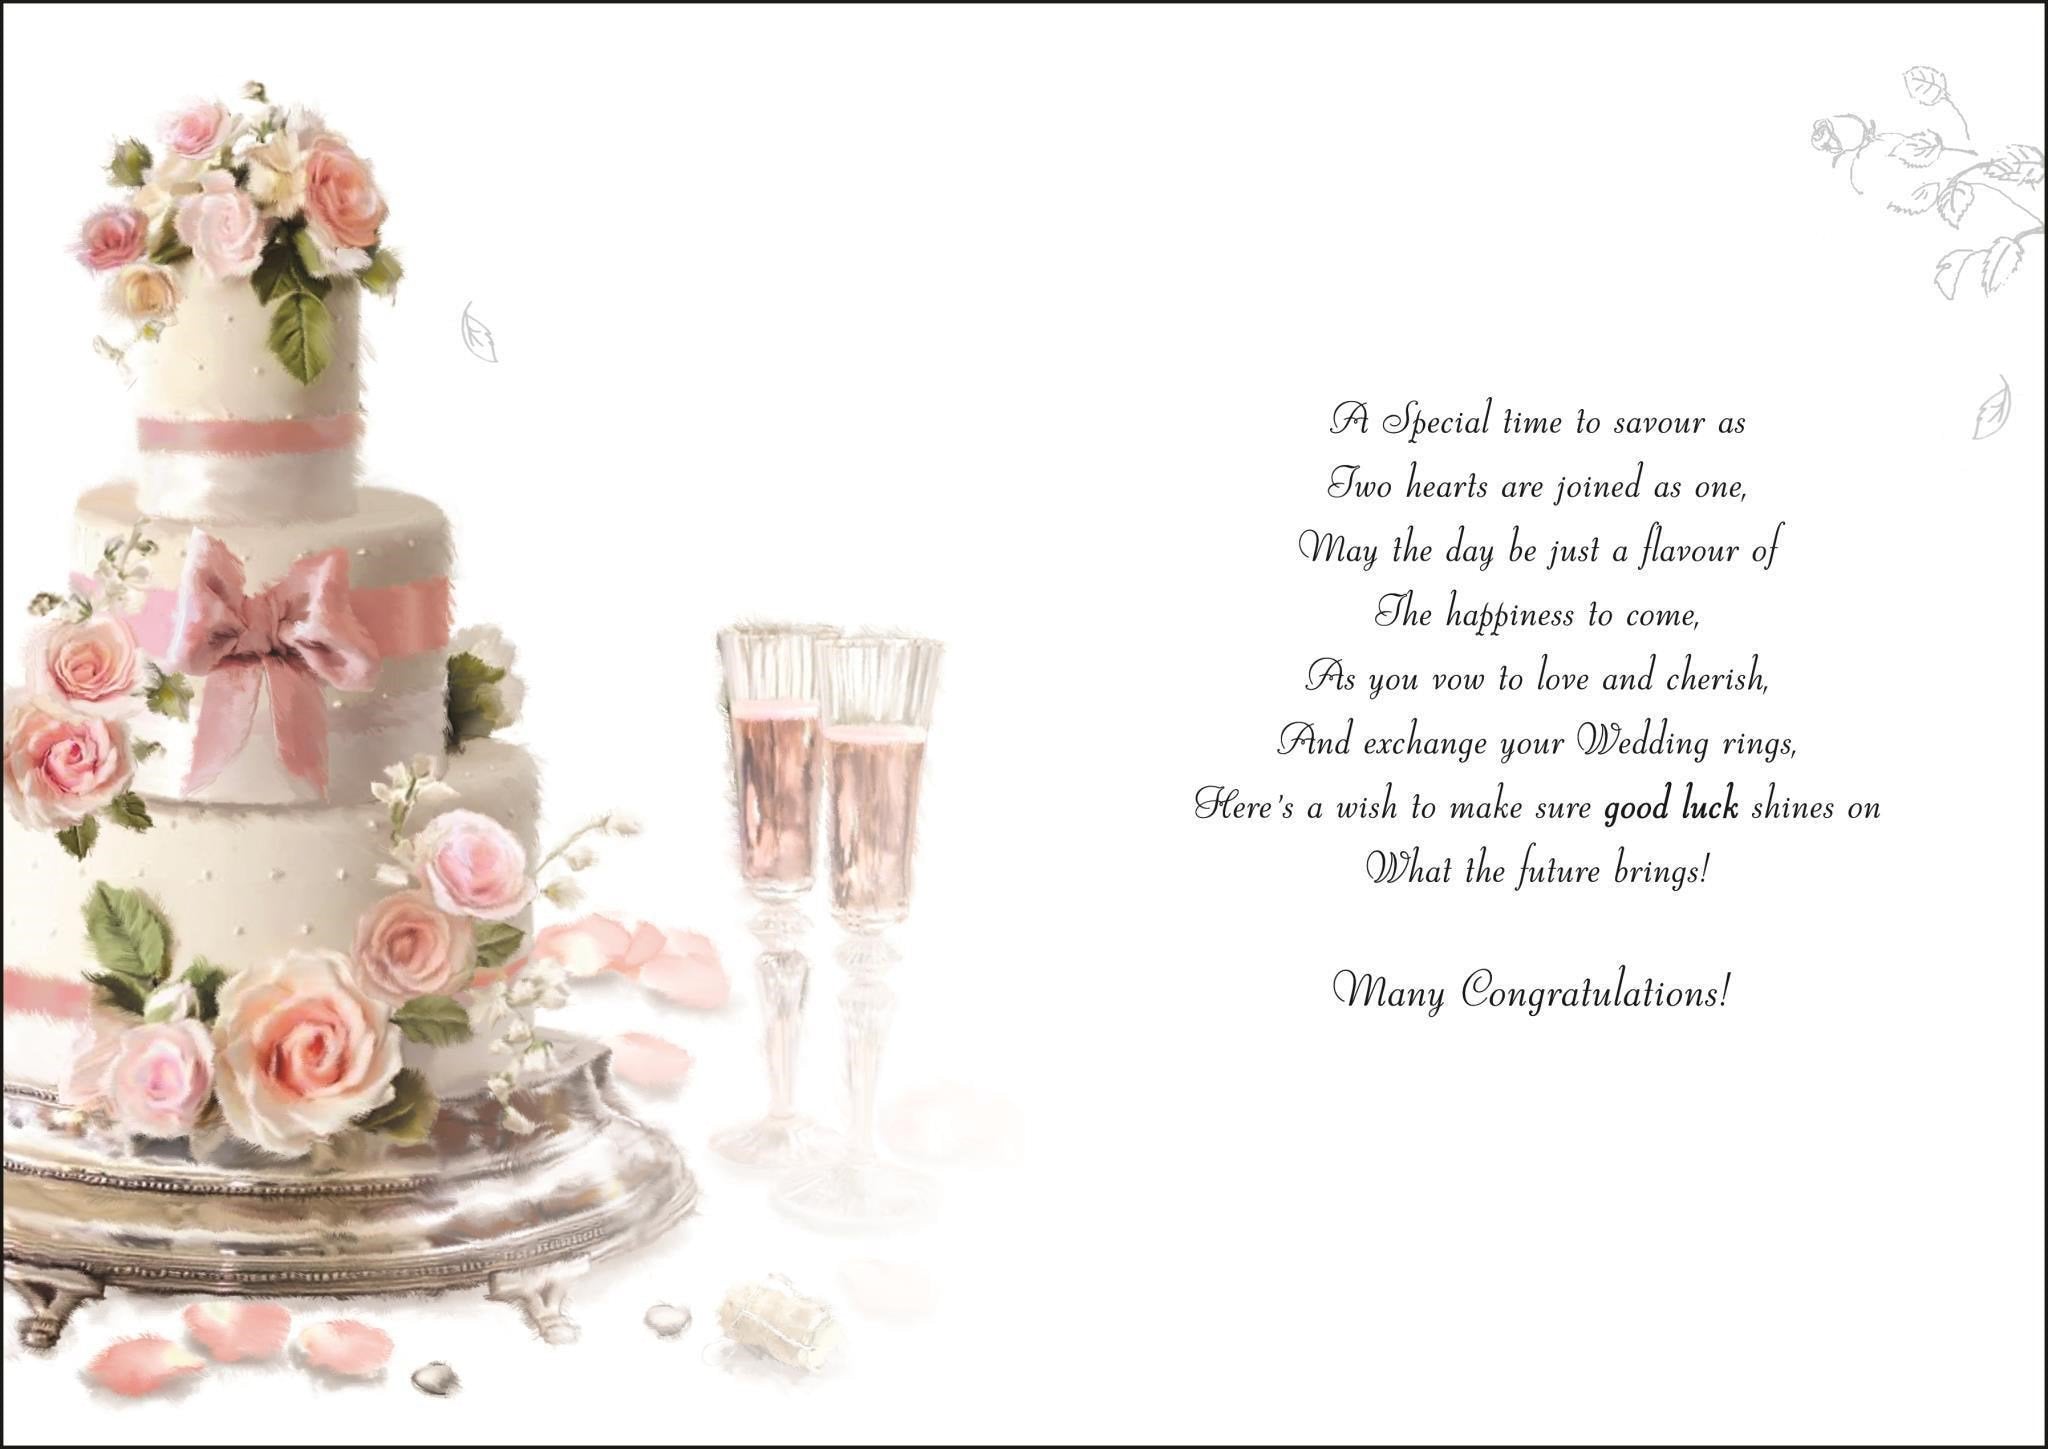 Inside of On Your Wedding Day Cake Greetings Card